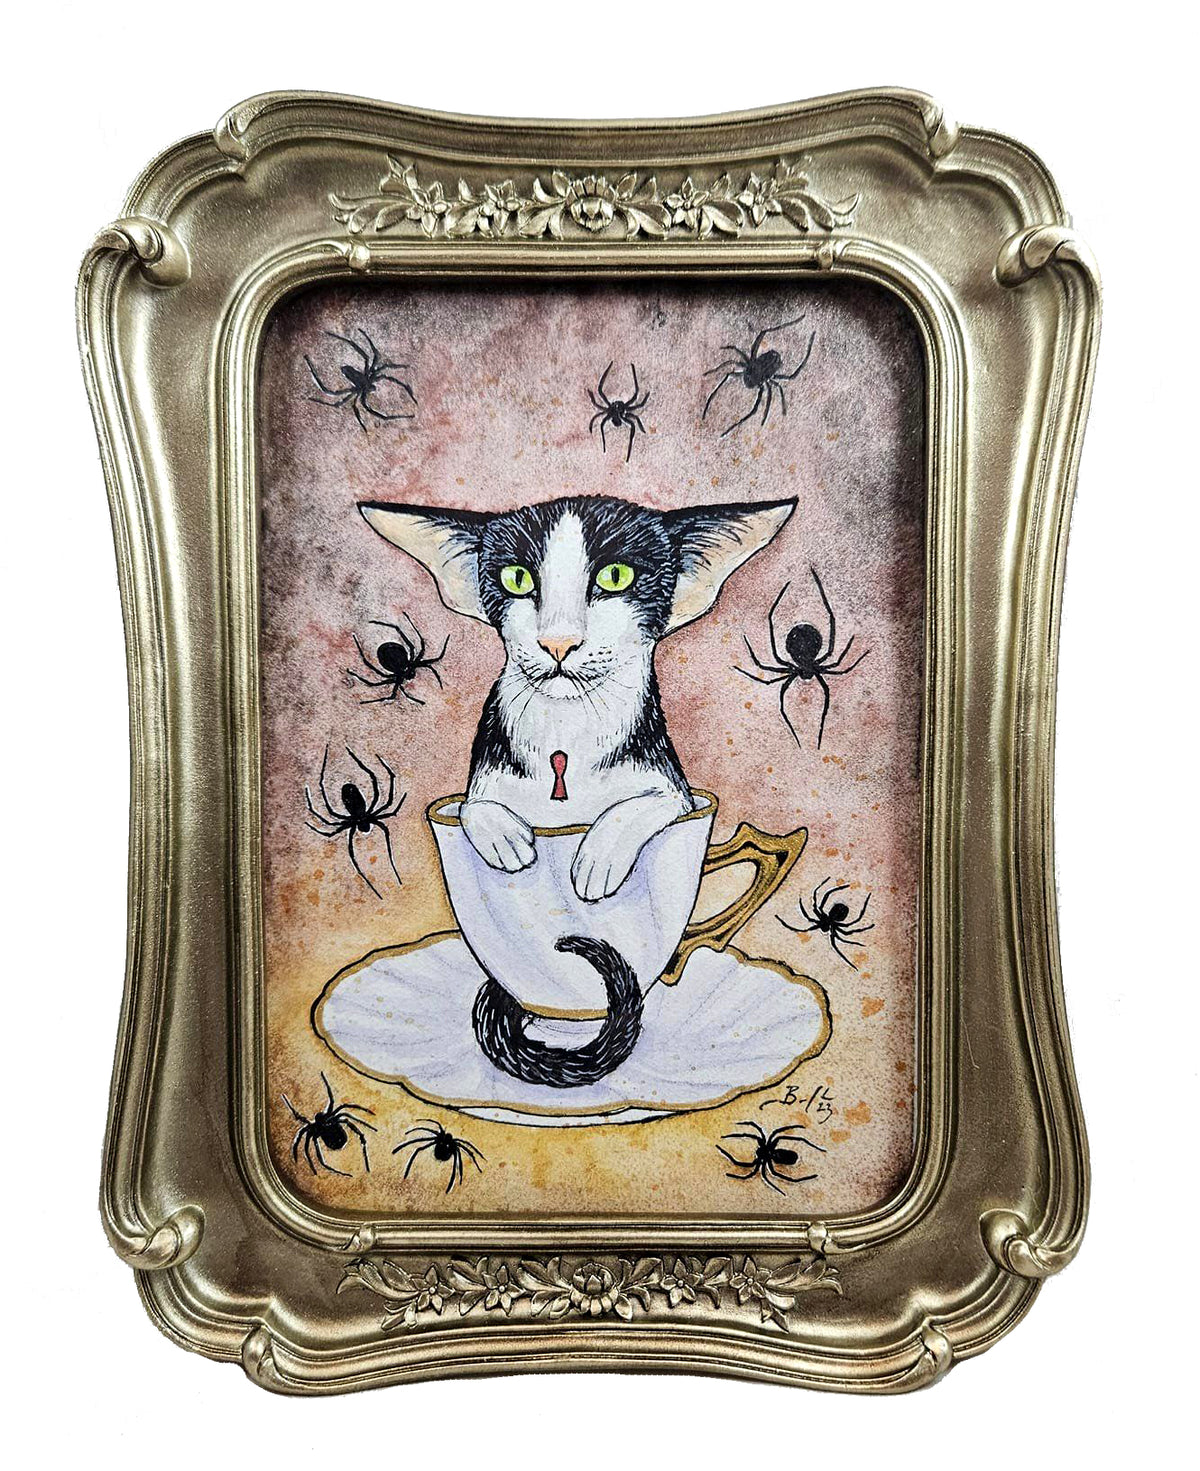 Original Art- Teacup Kitten: Lapsang Souchong with Spiders